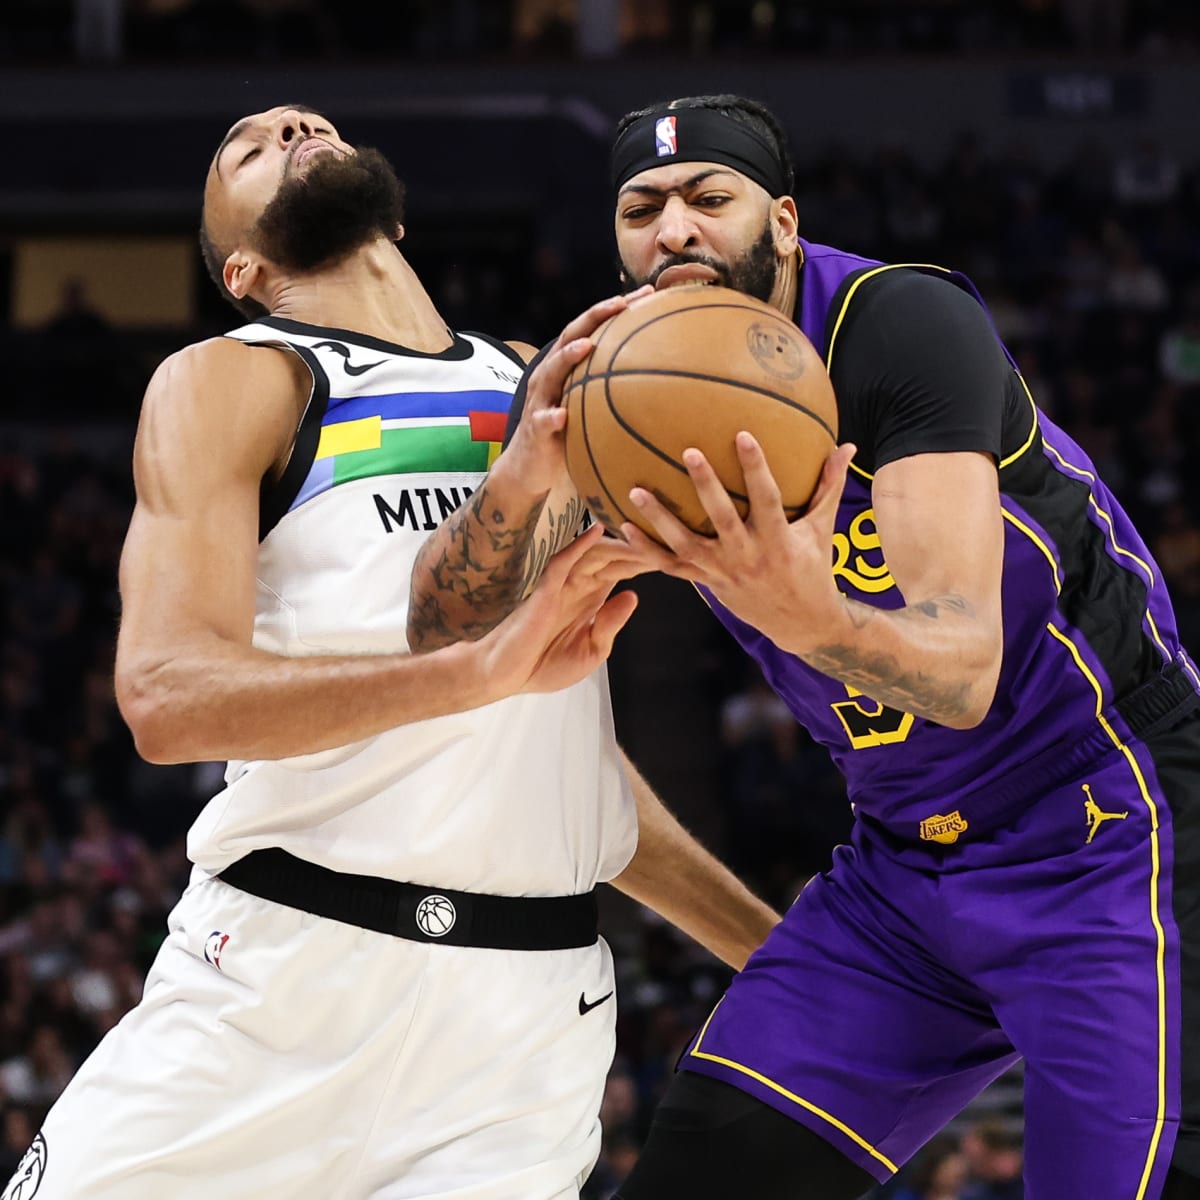 Rudy Gobert's 20-20 helps Timberwolves send Lakers to 0-5